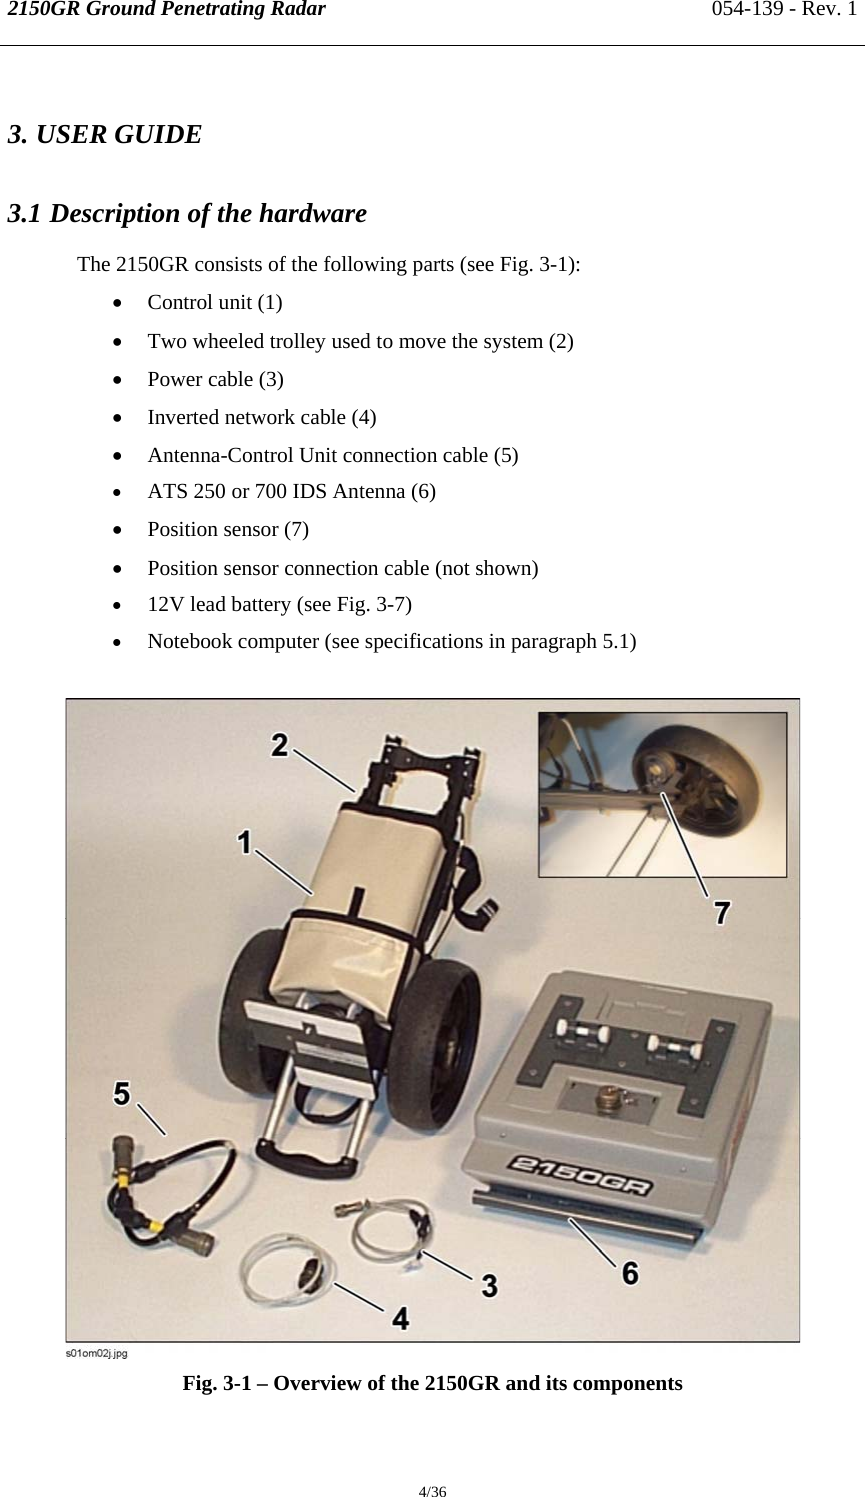 2150GR Ground Penetrating Radar 054-139 - Rev. 1  4/36 3. USER GUIDE 3.1 Description of the hardware The 2150GR consists of the following parts (see Fig. 3-1): • Control unit (1) • Two wheeled trolley used to move the system (2) • Power cable (3) • Inverted network cable (4) • Antenna-Control Unit connection cable (5) • ATS 250 or 700 IDS Antenna (6) • Position sensor (7) • Position sensor connection cable (not shown) • 12V lead battery (see Fig. 3-7) • Notebook computer (see specifications in paragraph 5.1)   Fig. 3-1 – Overview of the 2150GR and its components 